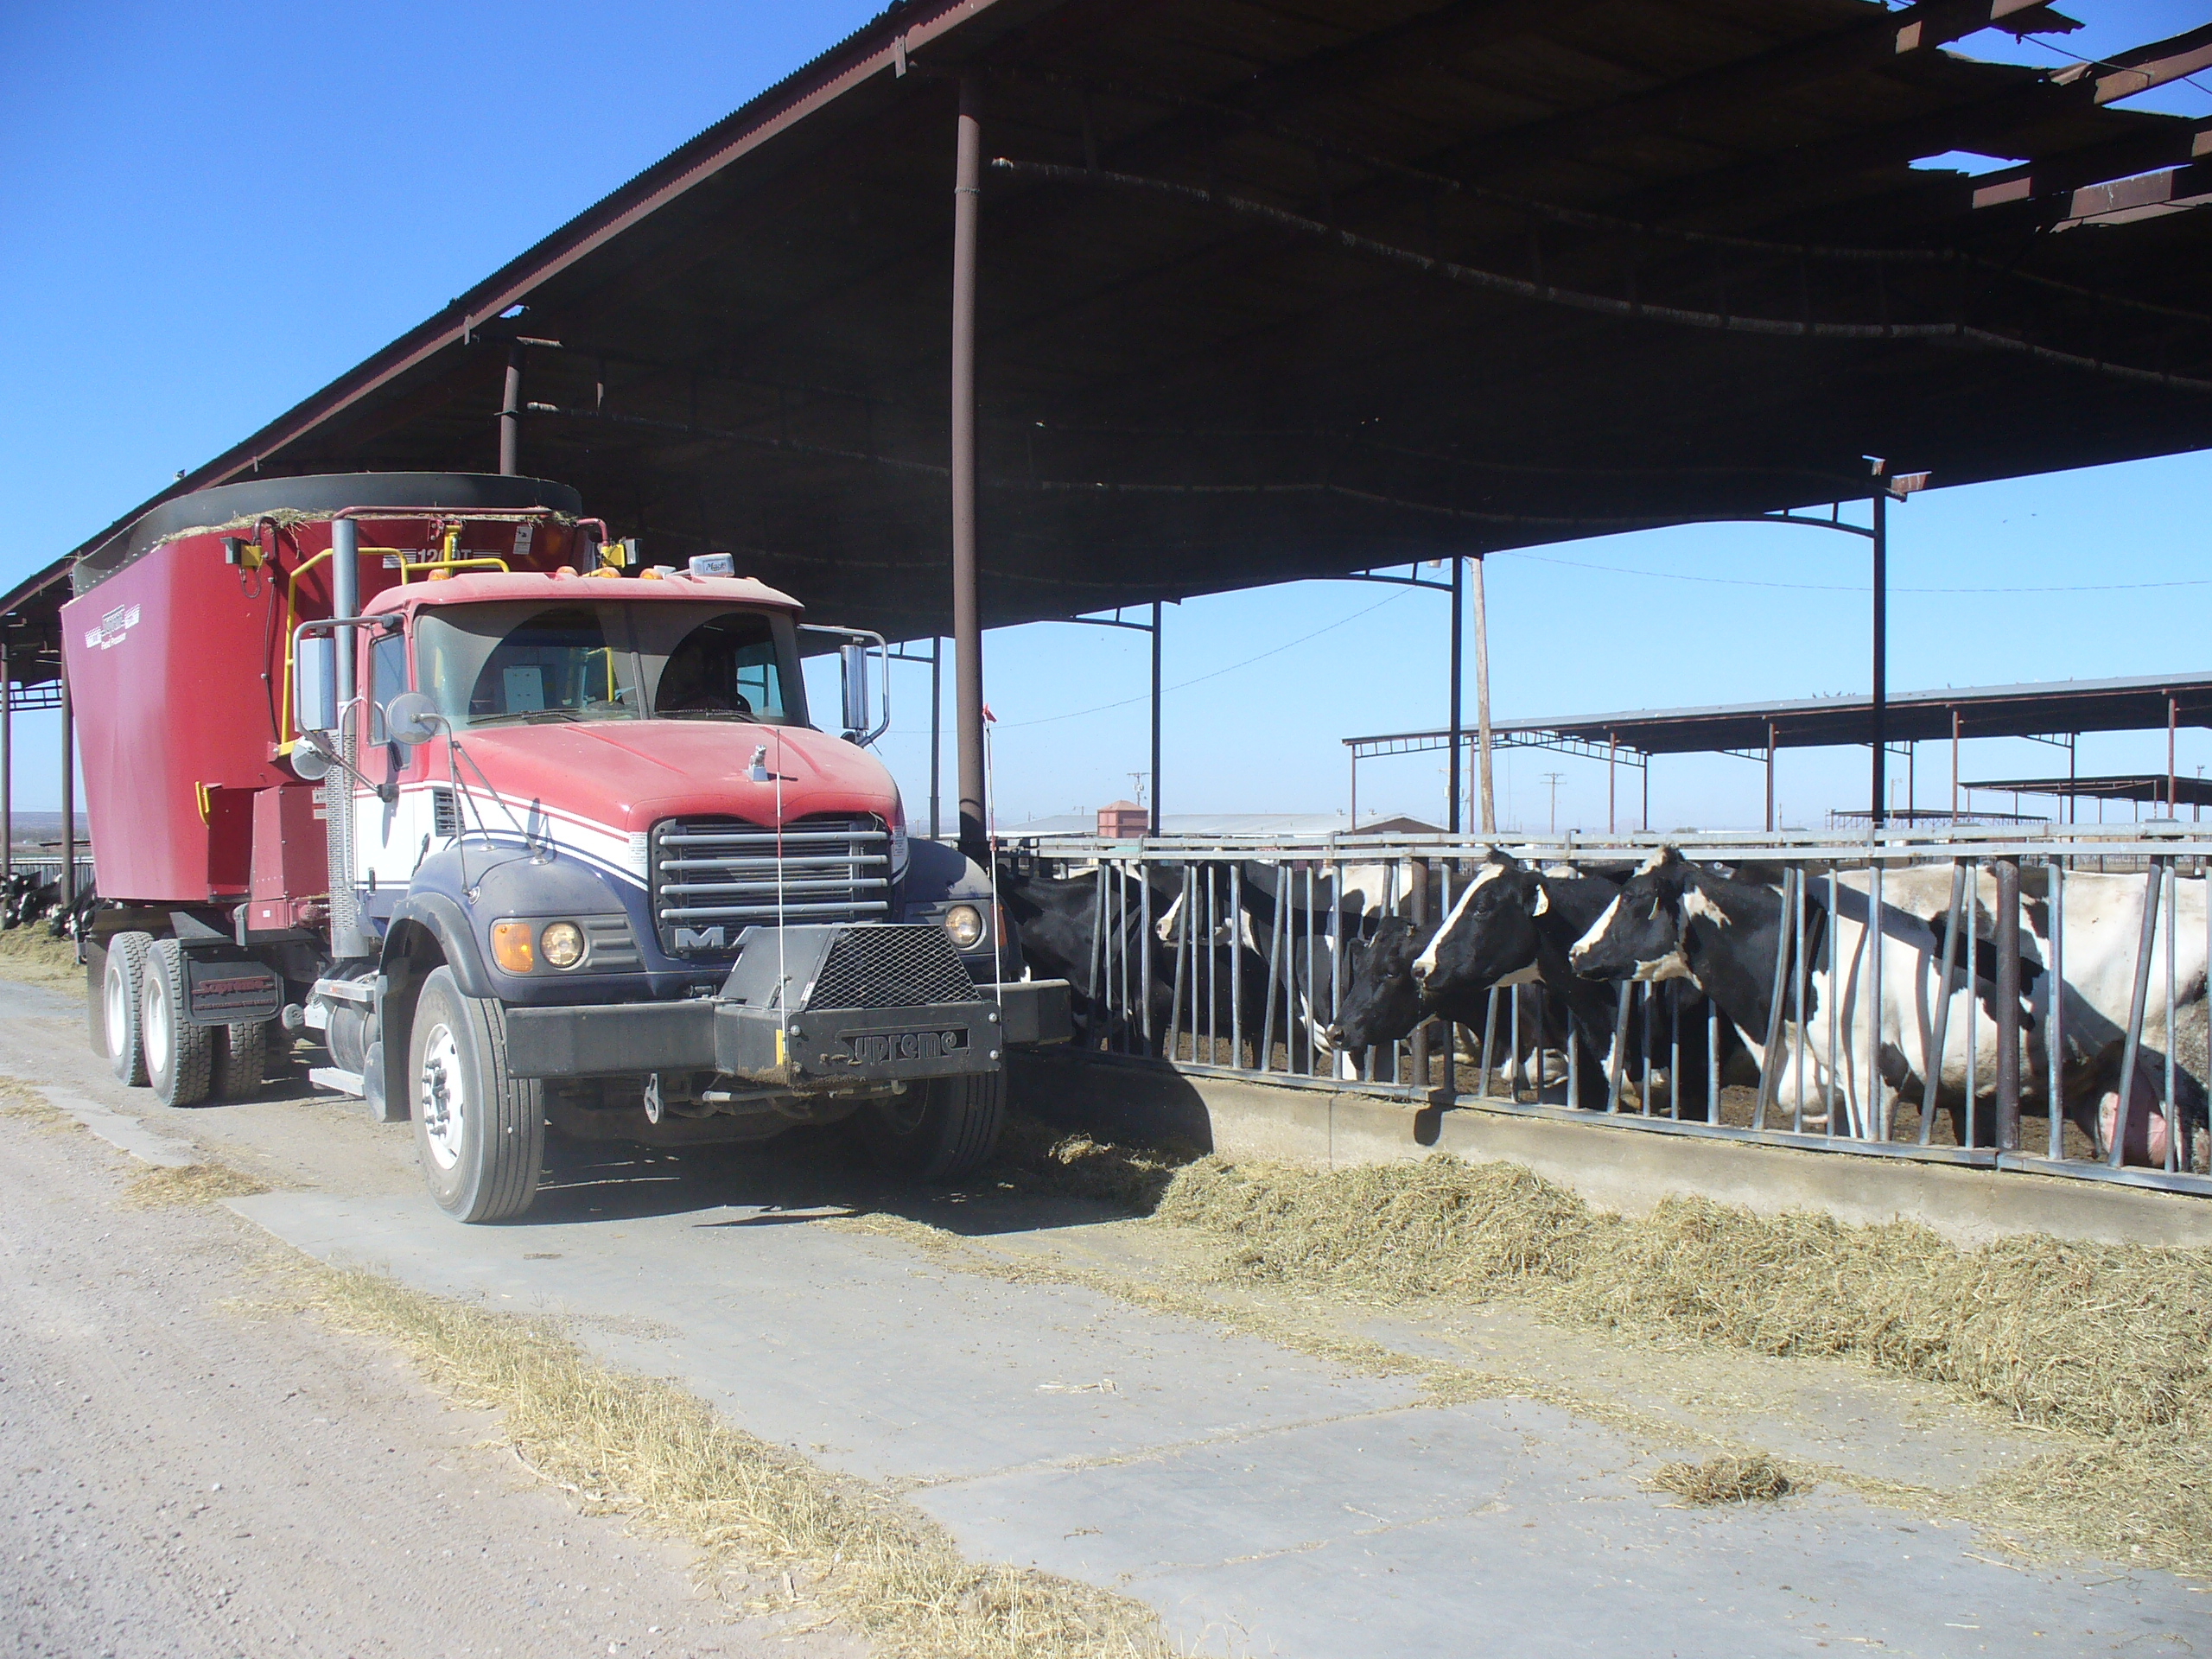 red feed truck distributing feed to cows at a dairy farm under a partially covered shed on a sunny day